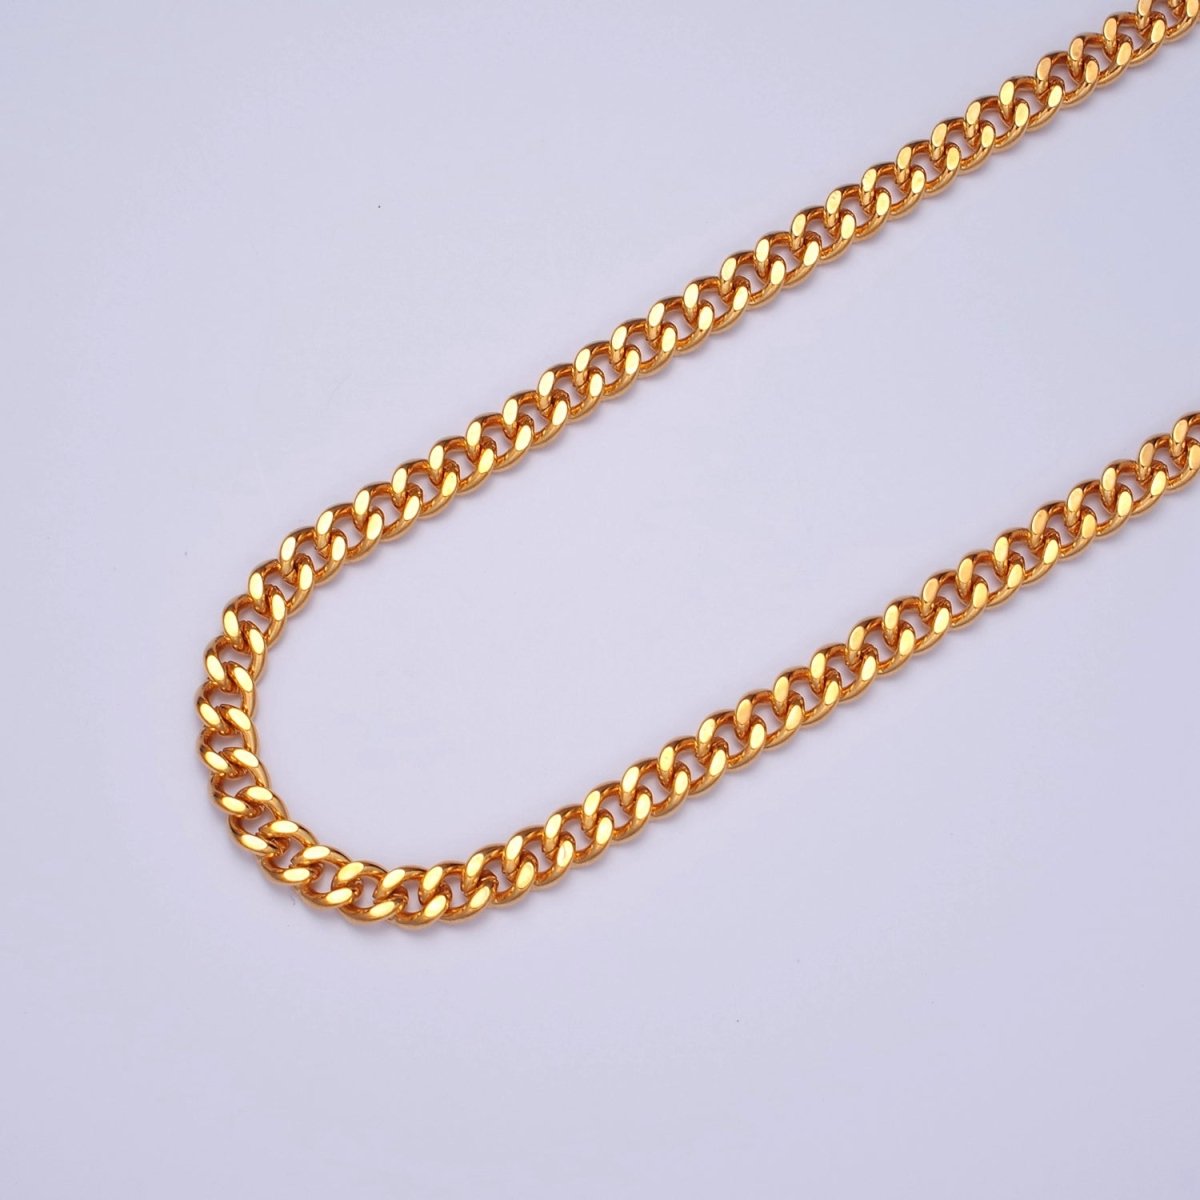 Miami Cuban Curb Link Unfinished Chain, 5mm 24k Gold Filled Chain 19.5 inch long | WA-1399 Clearance Pricing - DLUXCA